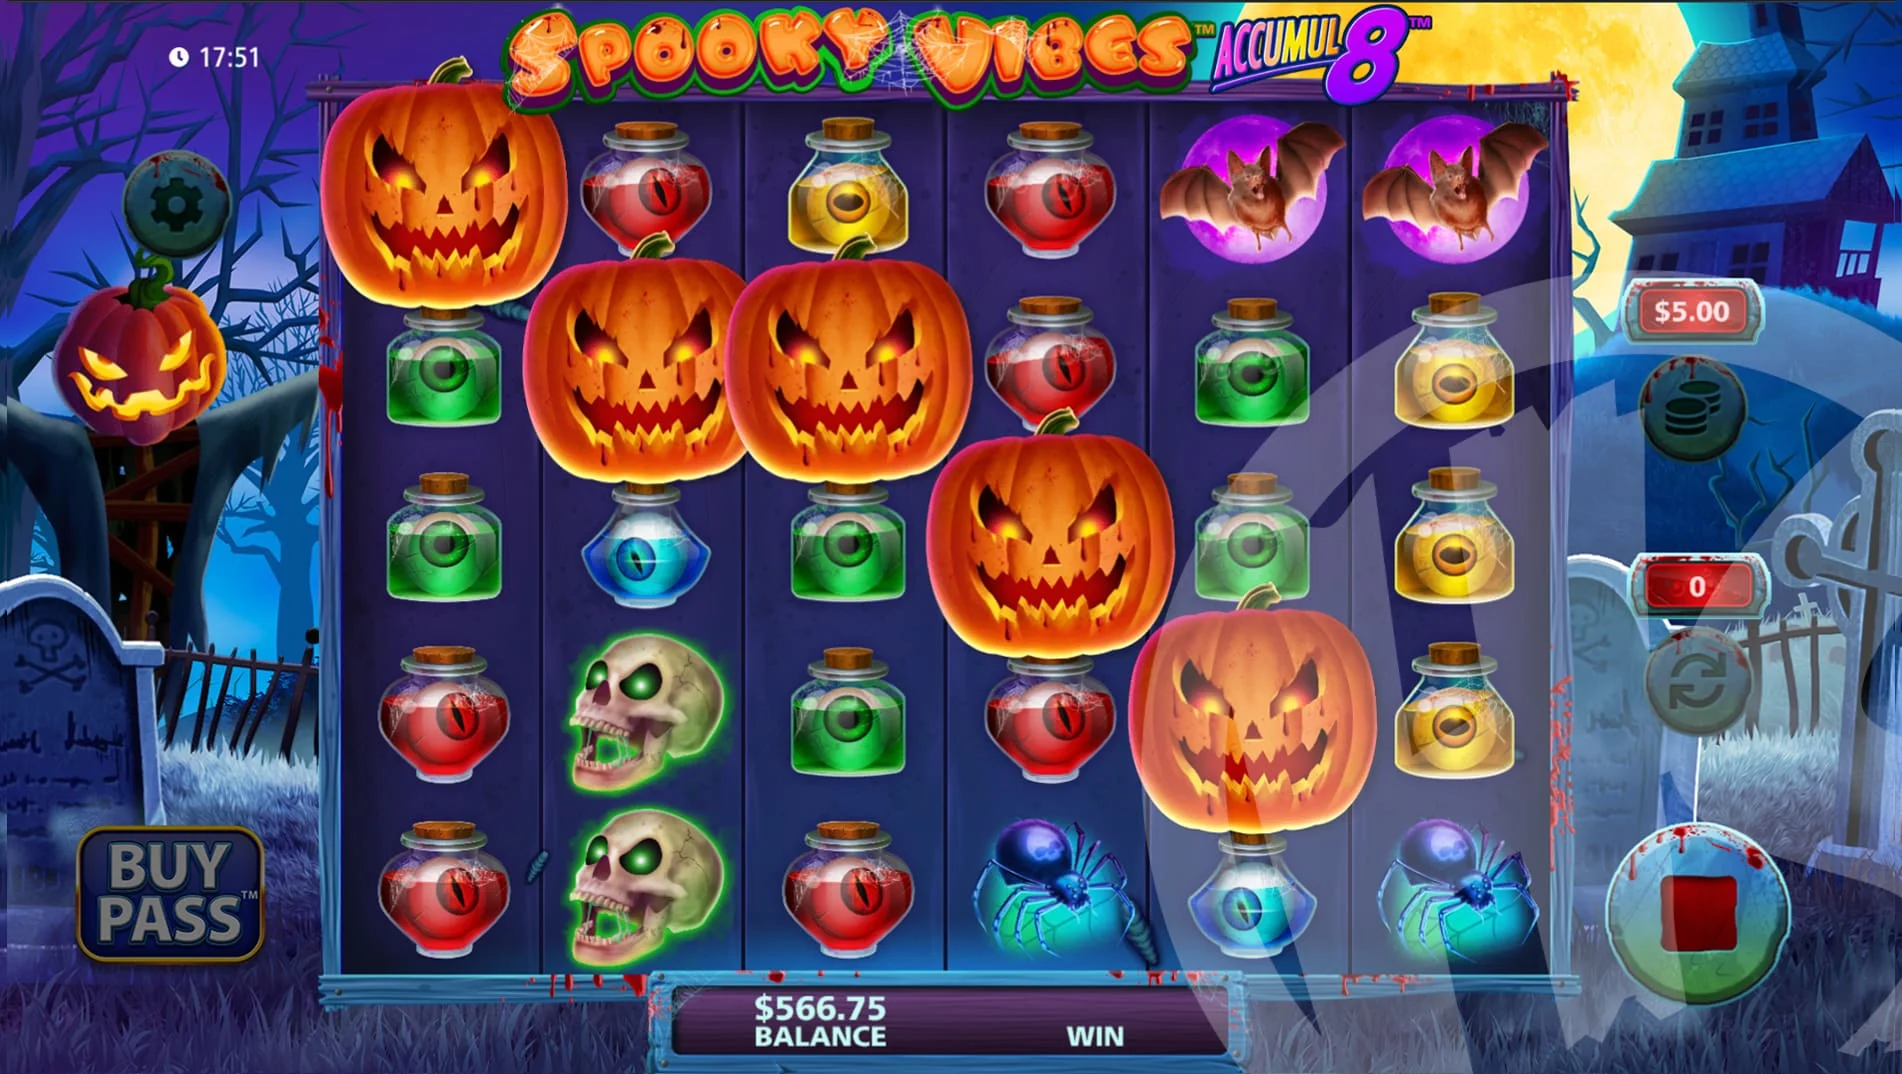 Land 3 or More Pumpkins to Trigger Free Spins